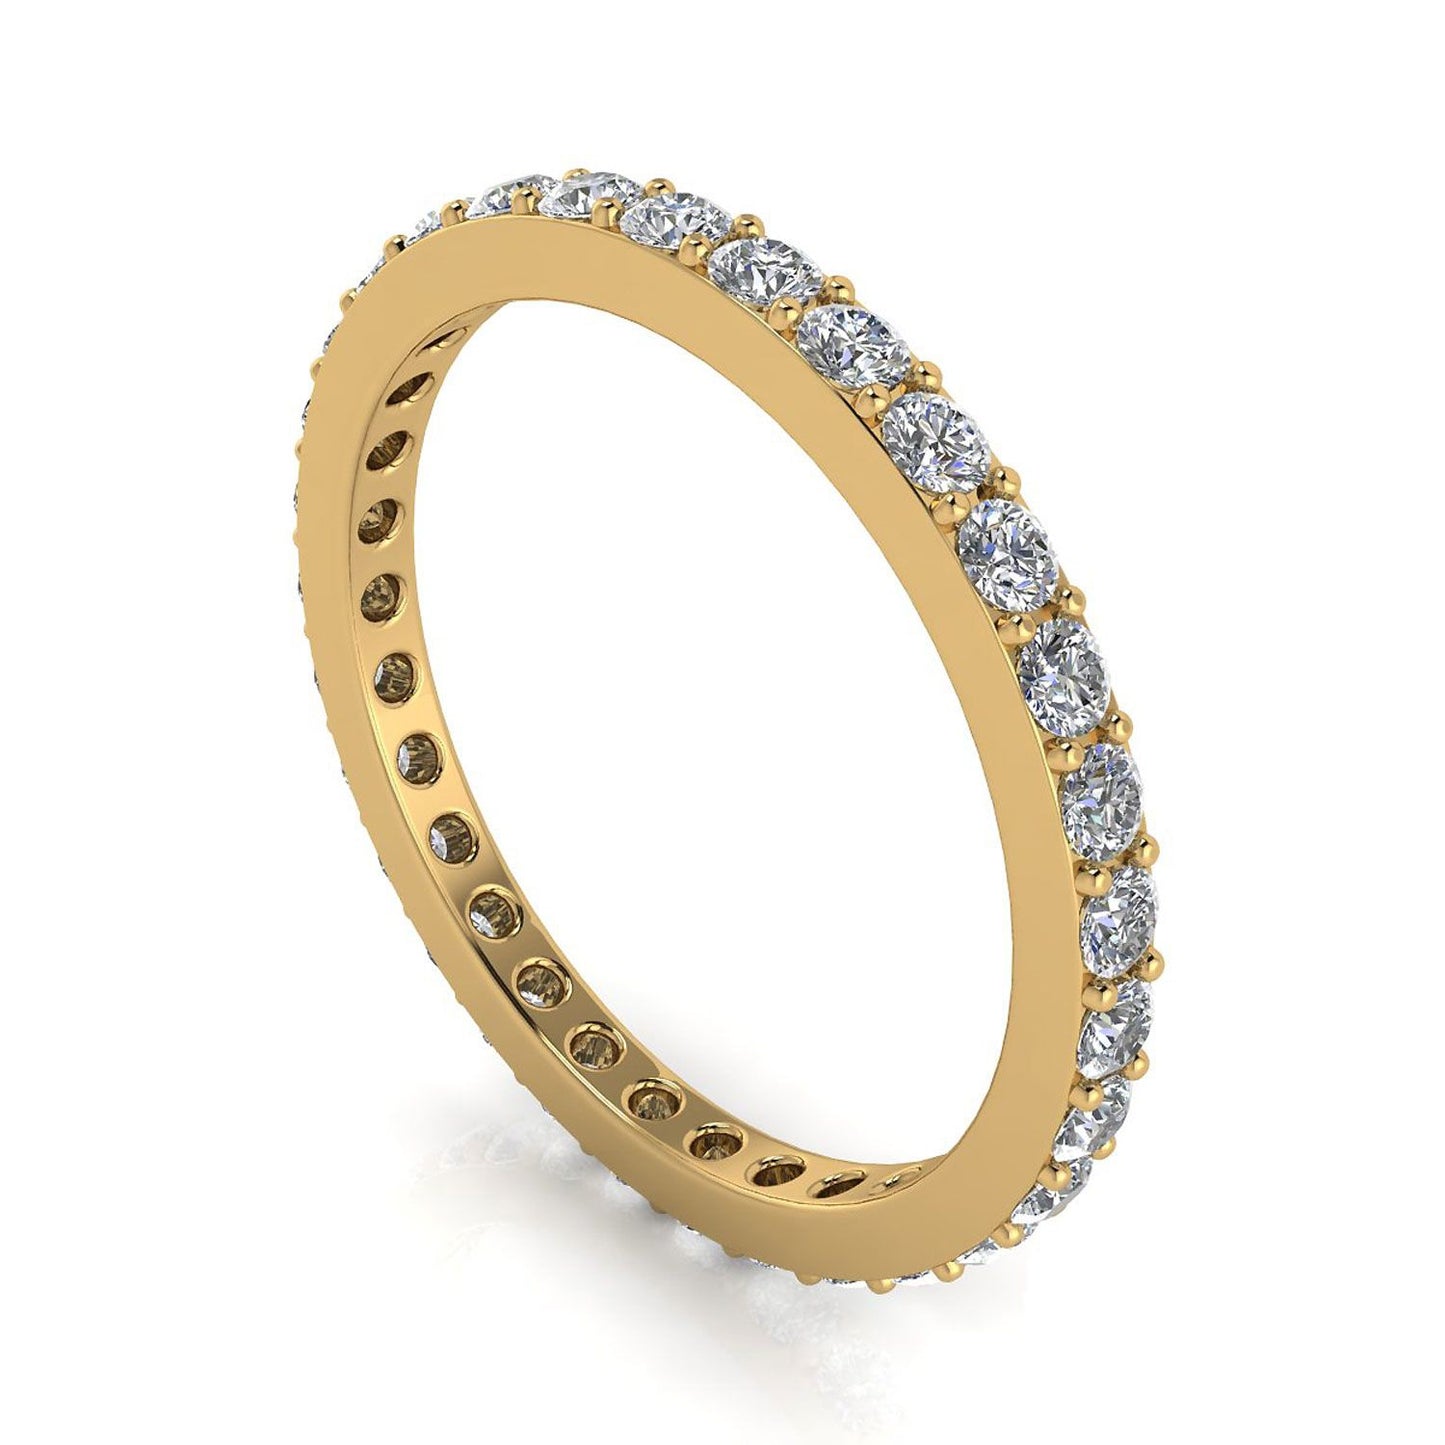 Round Brilliant Cut Diamond Pave Set Eternity Ring In 18k Yellow Gold  (0.66ct. Tw.) Ring Size 6